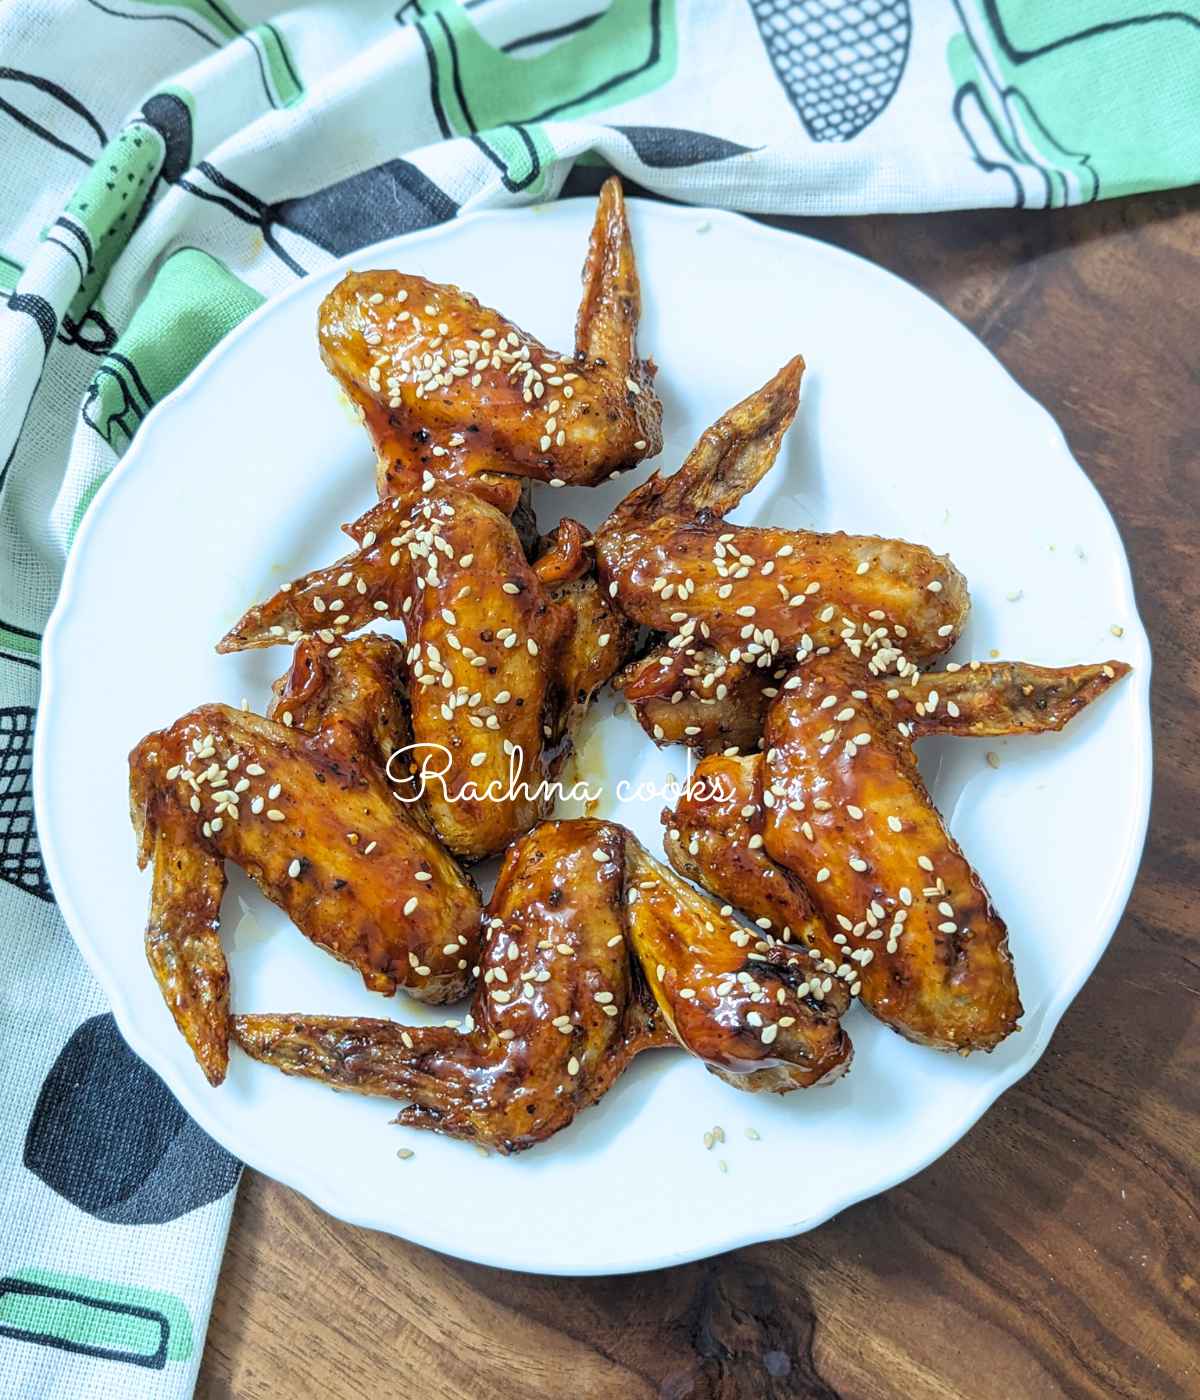 Teriyaki chicken wings served on a white plate.